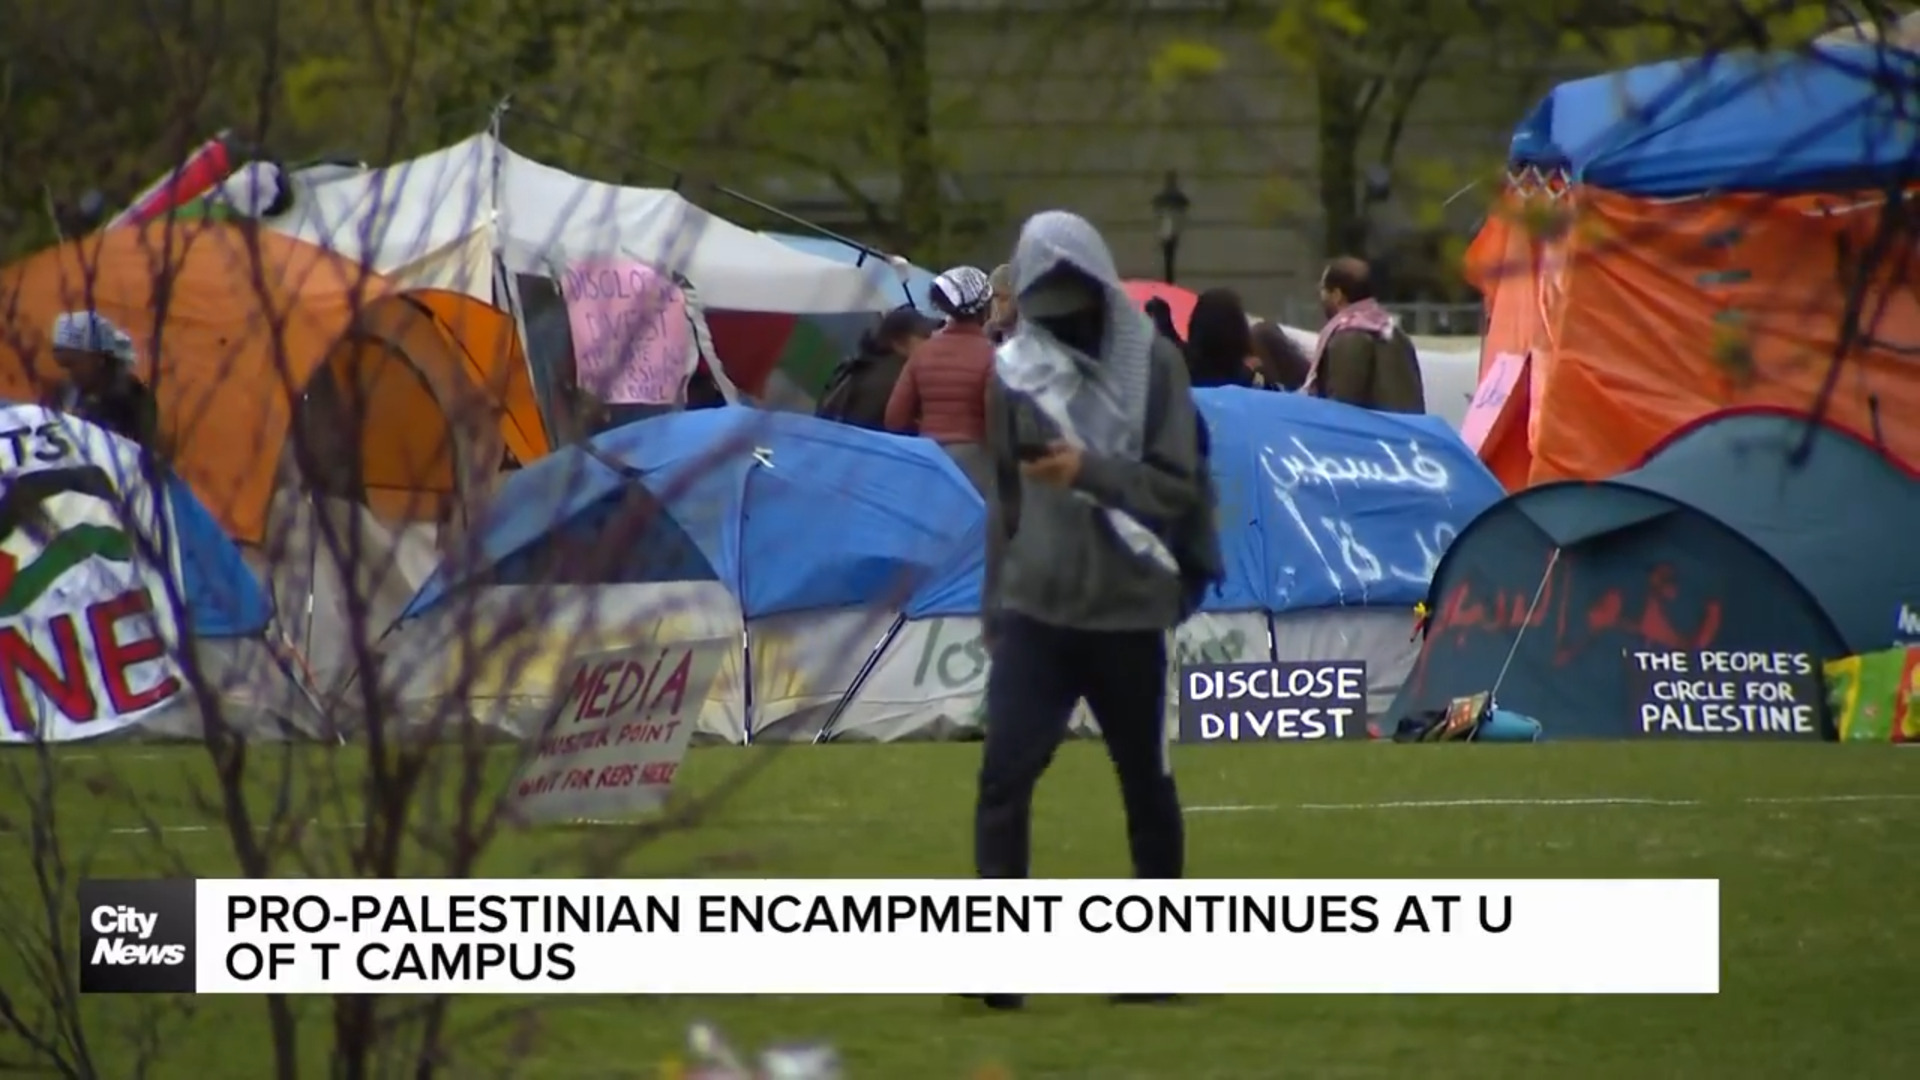 Pro-Palestinian encampment continues at U of T